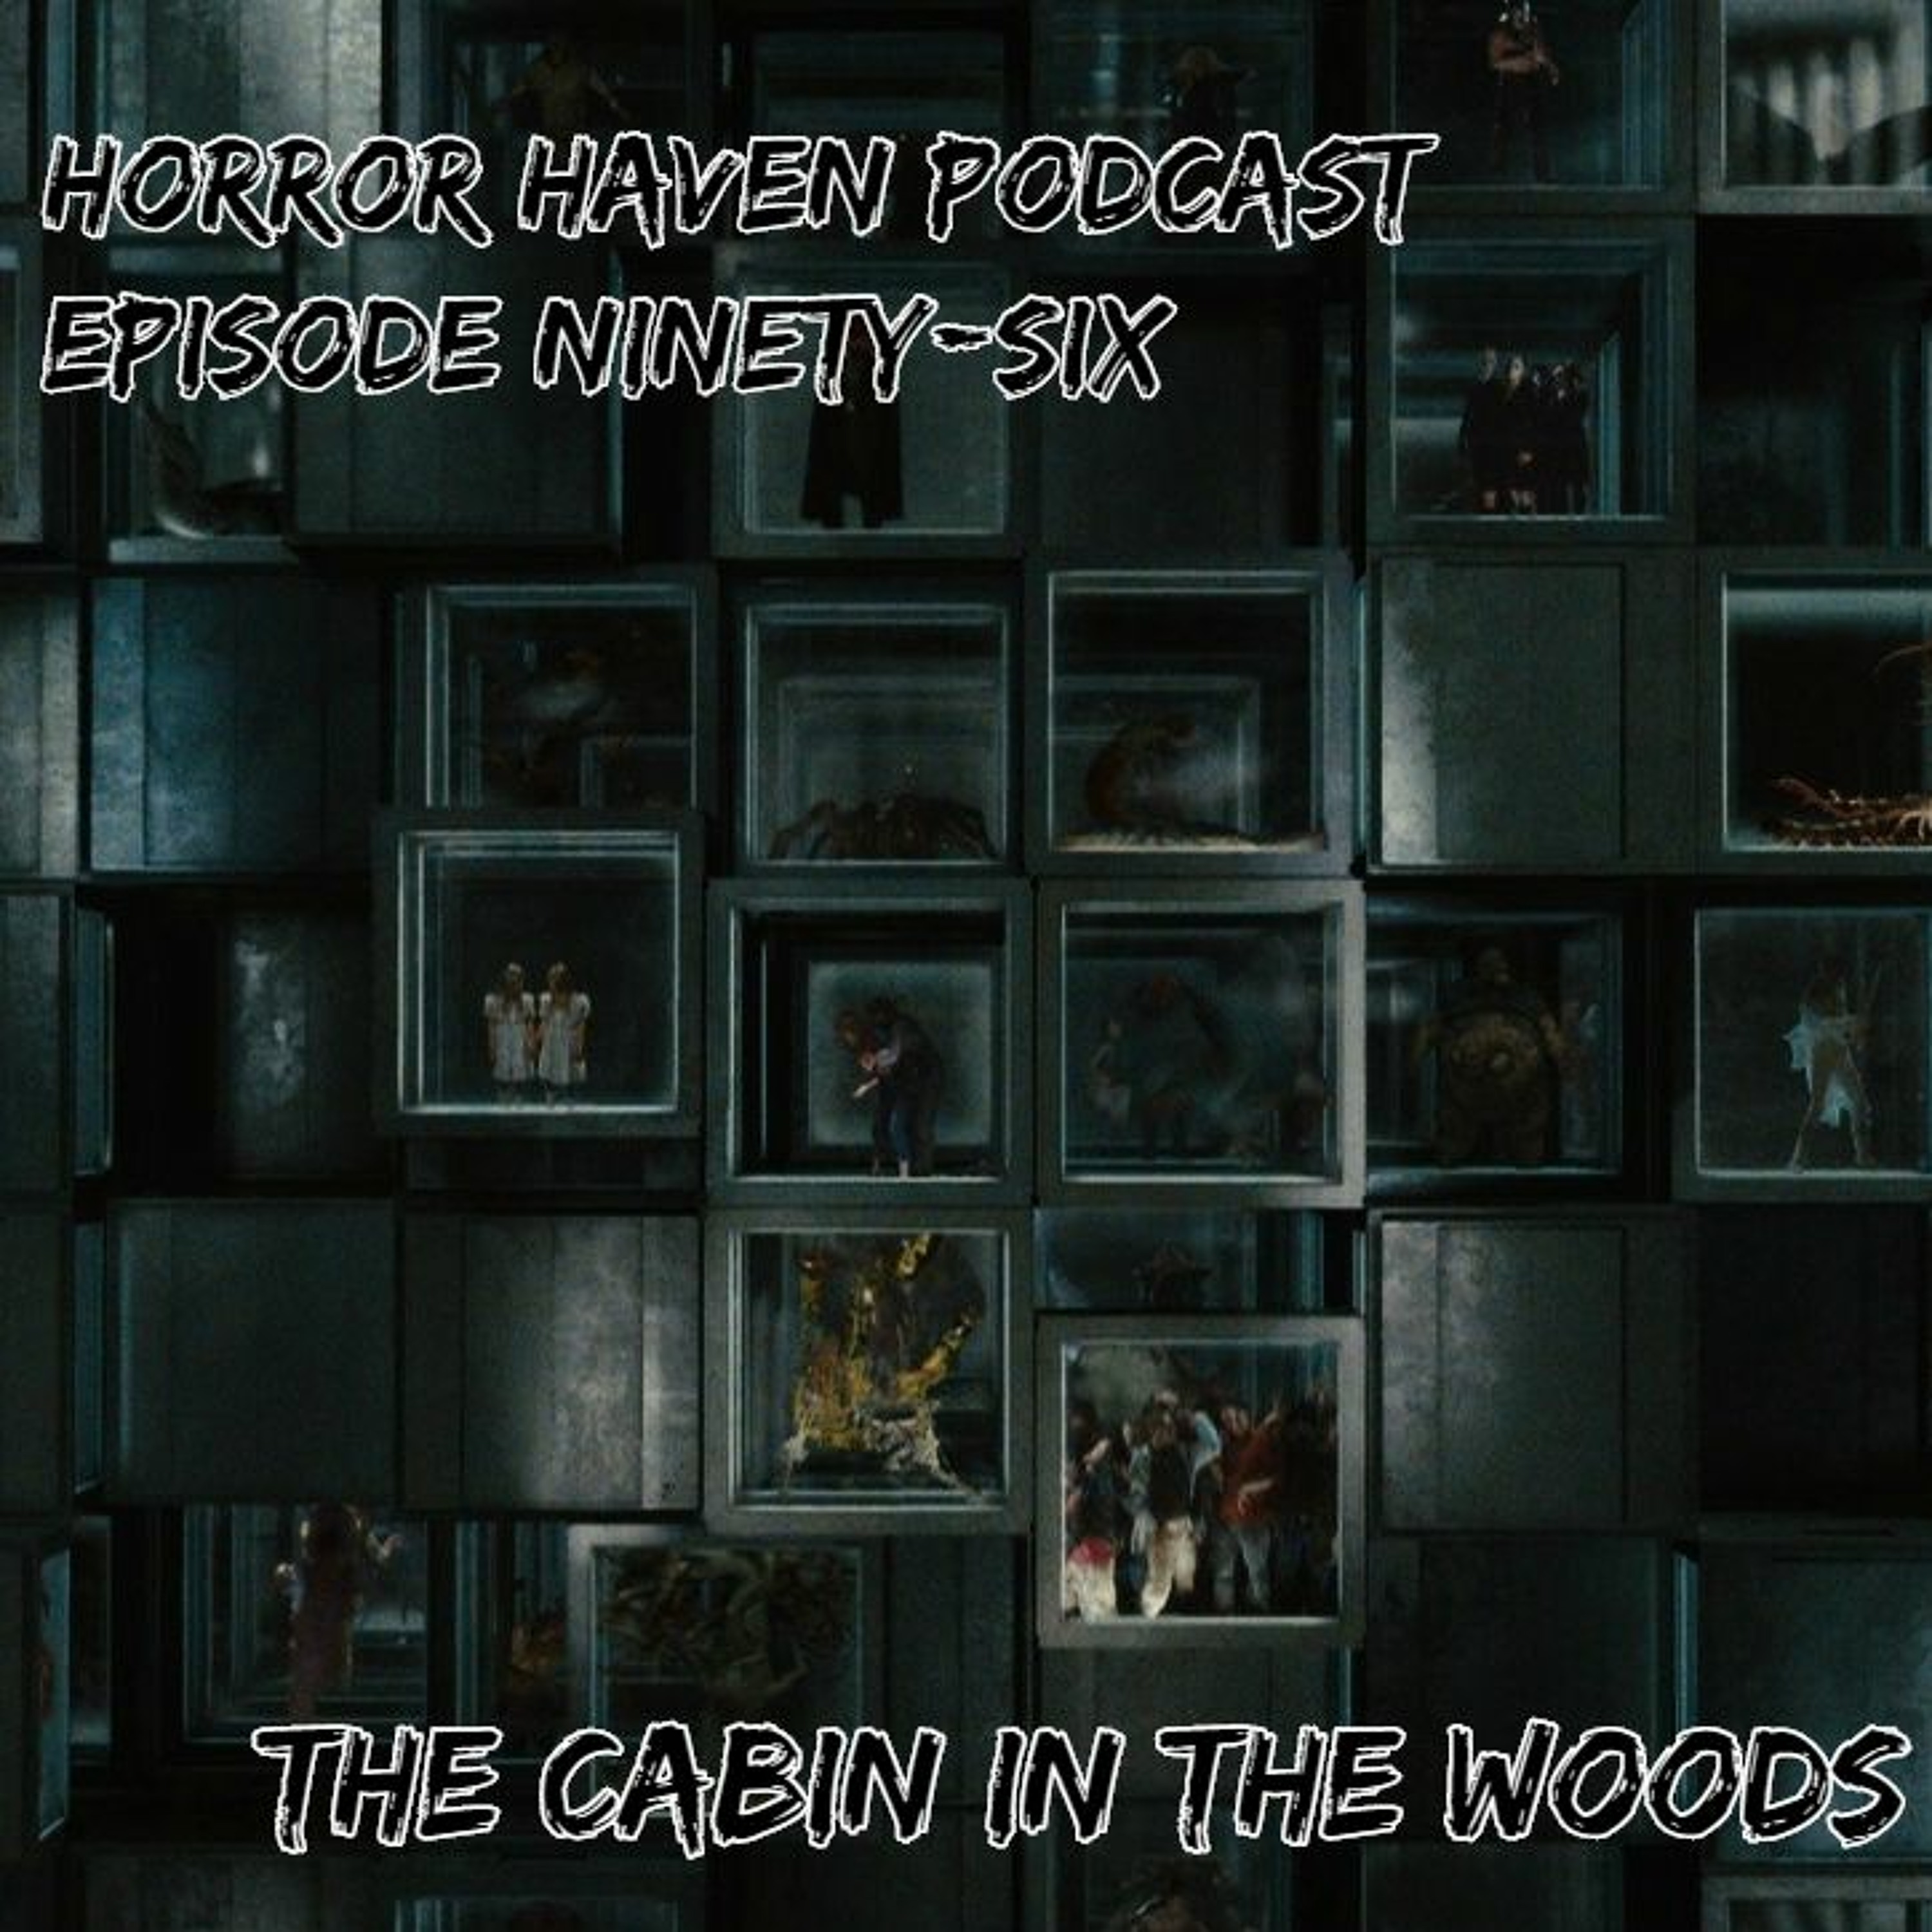 Episode Ninety-Six: The Cabin In The Woods